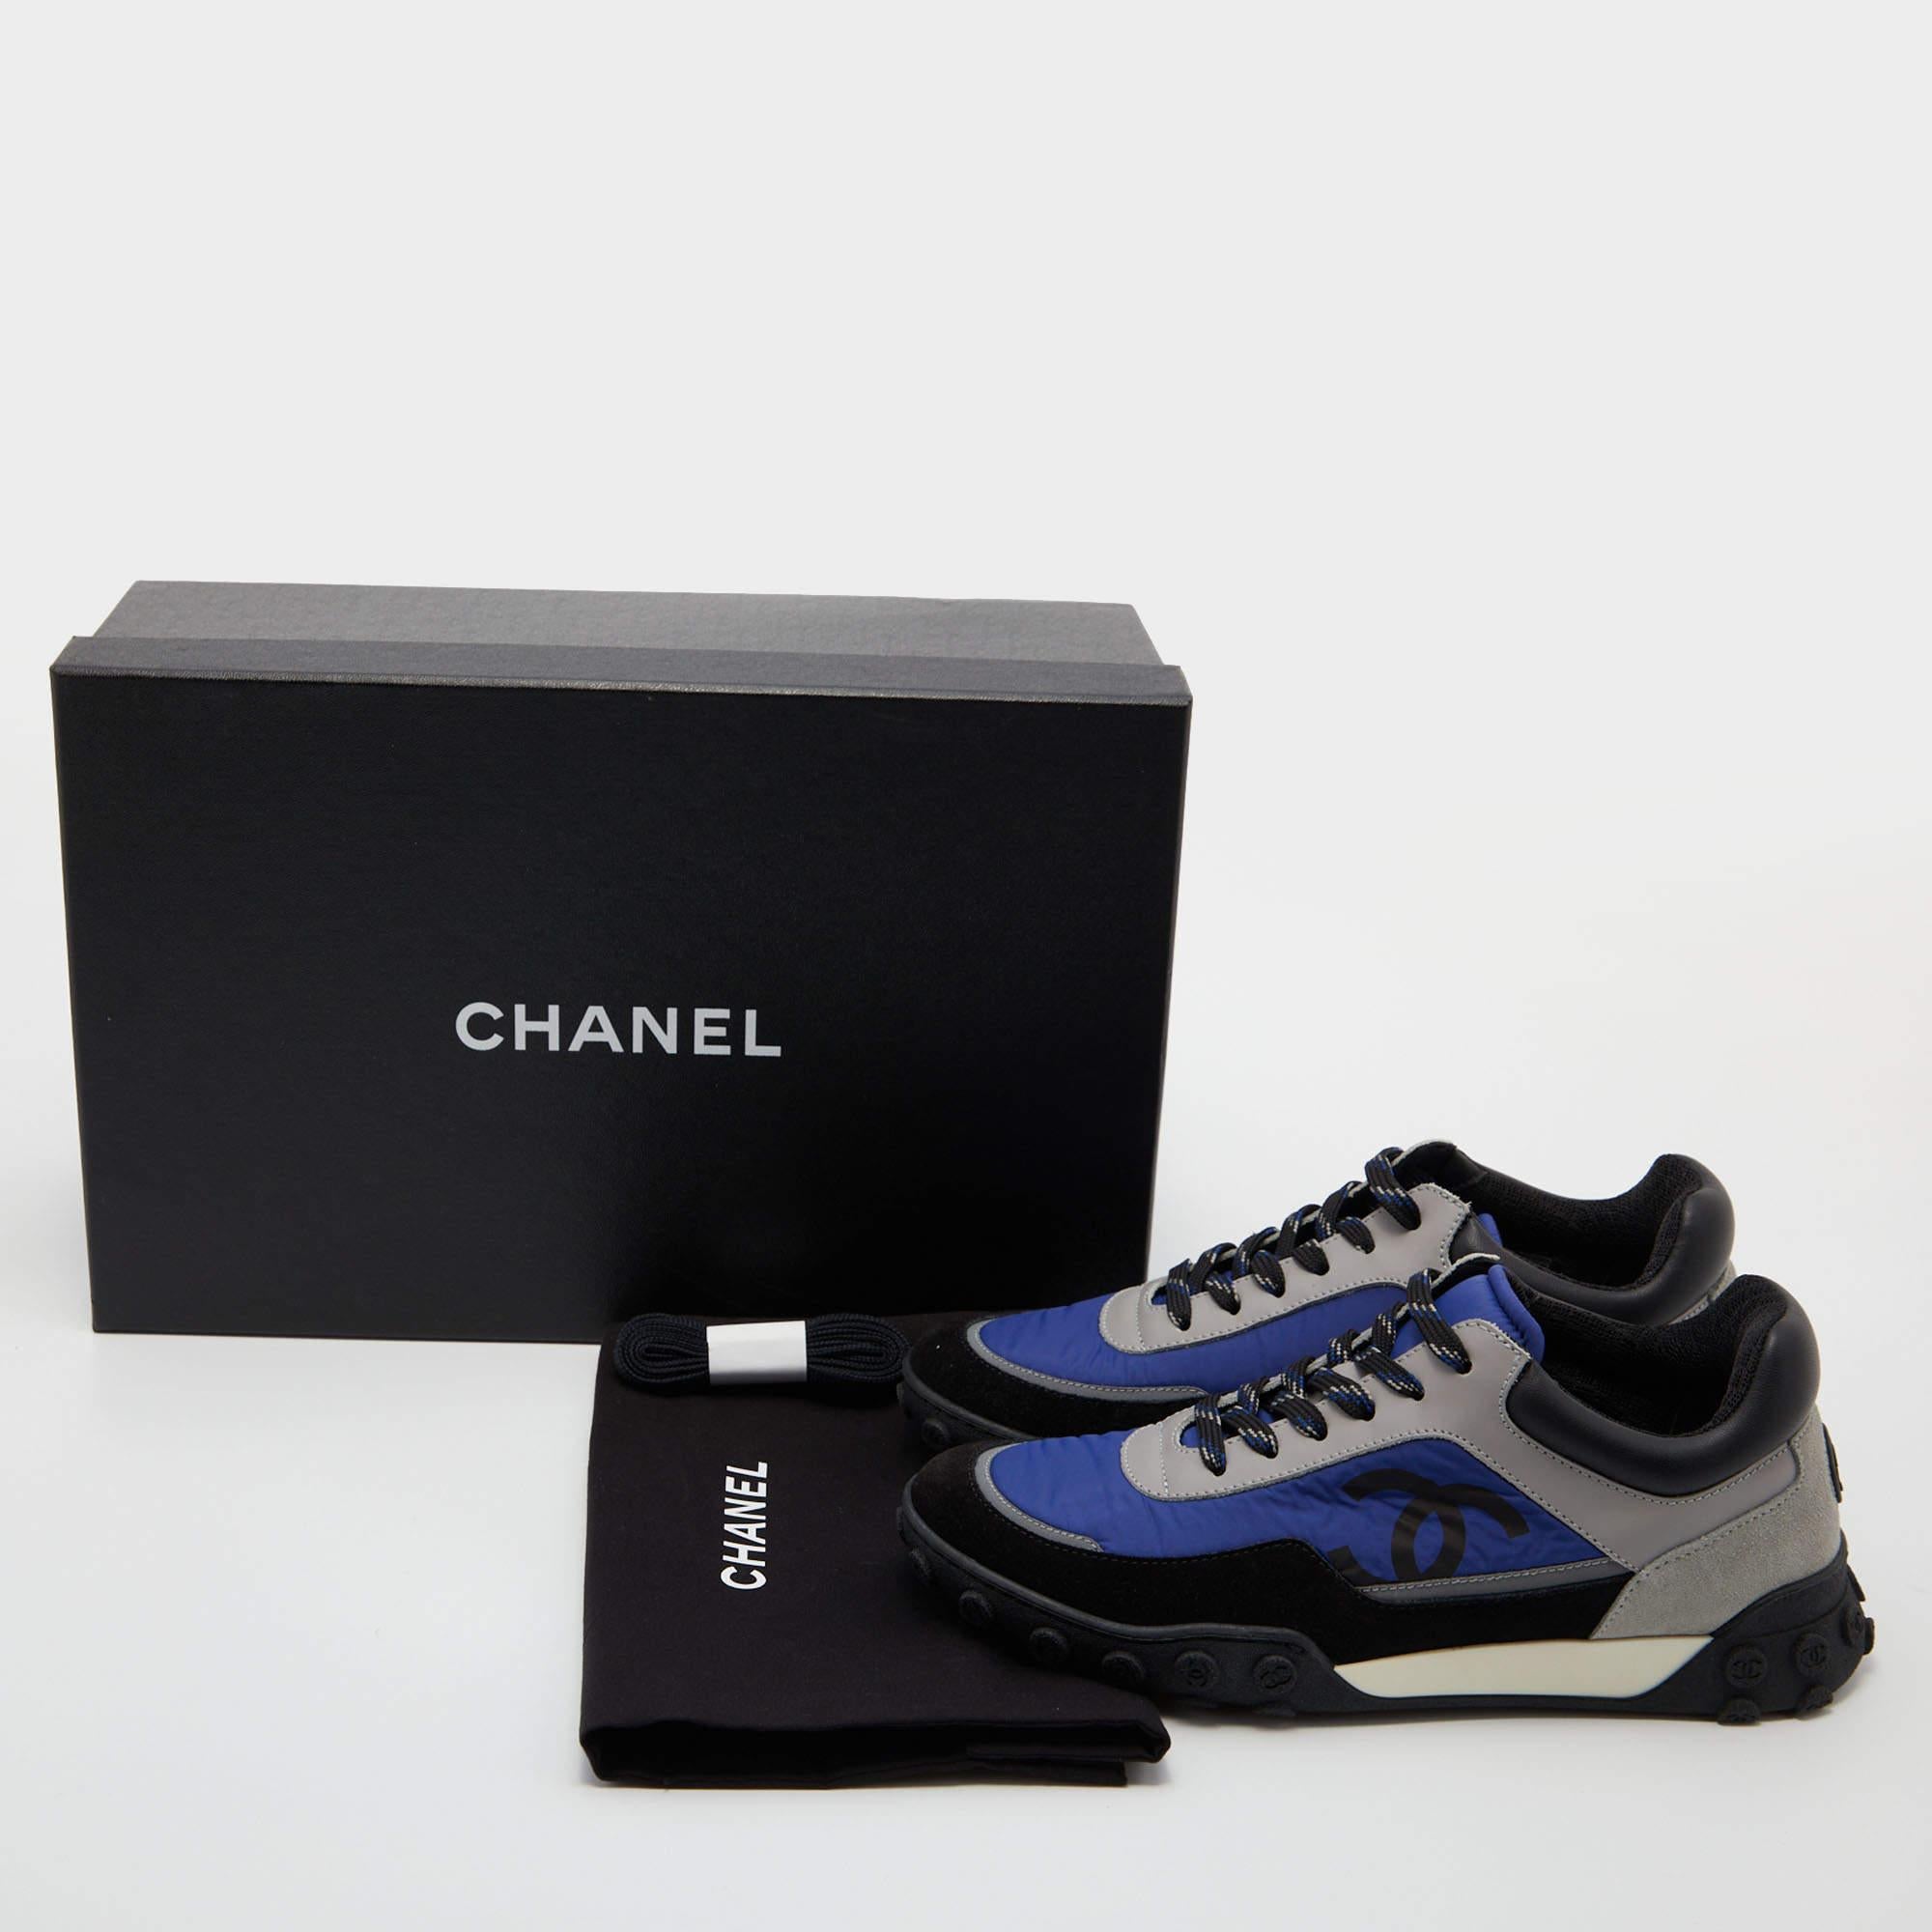 Chanel Multicolor Neoprene, Suede and Leather CC Low Top Sneakers Size 37 4